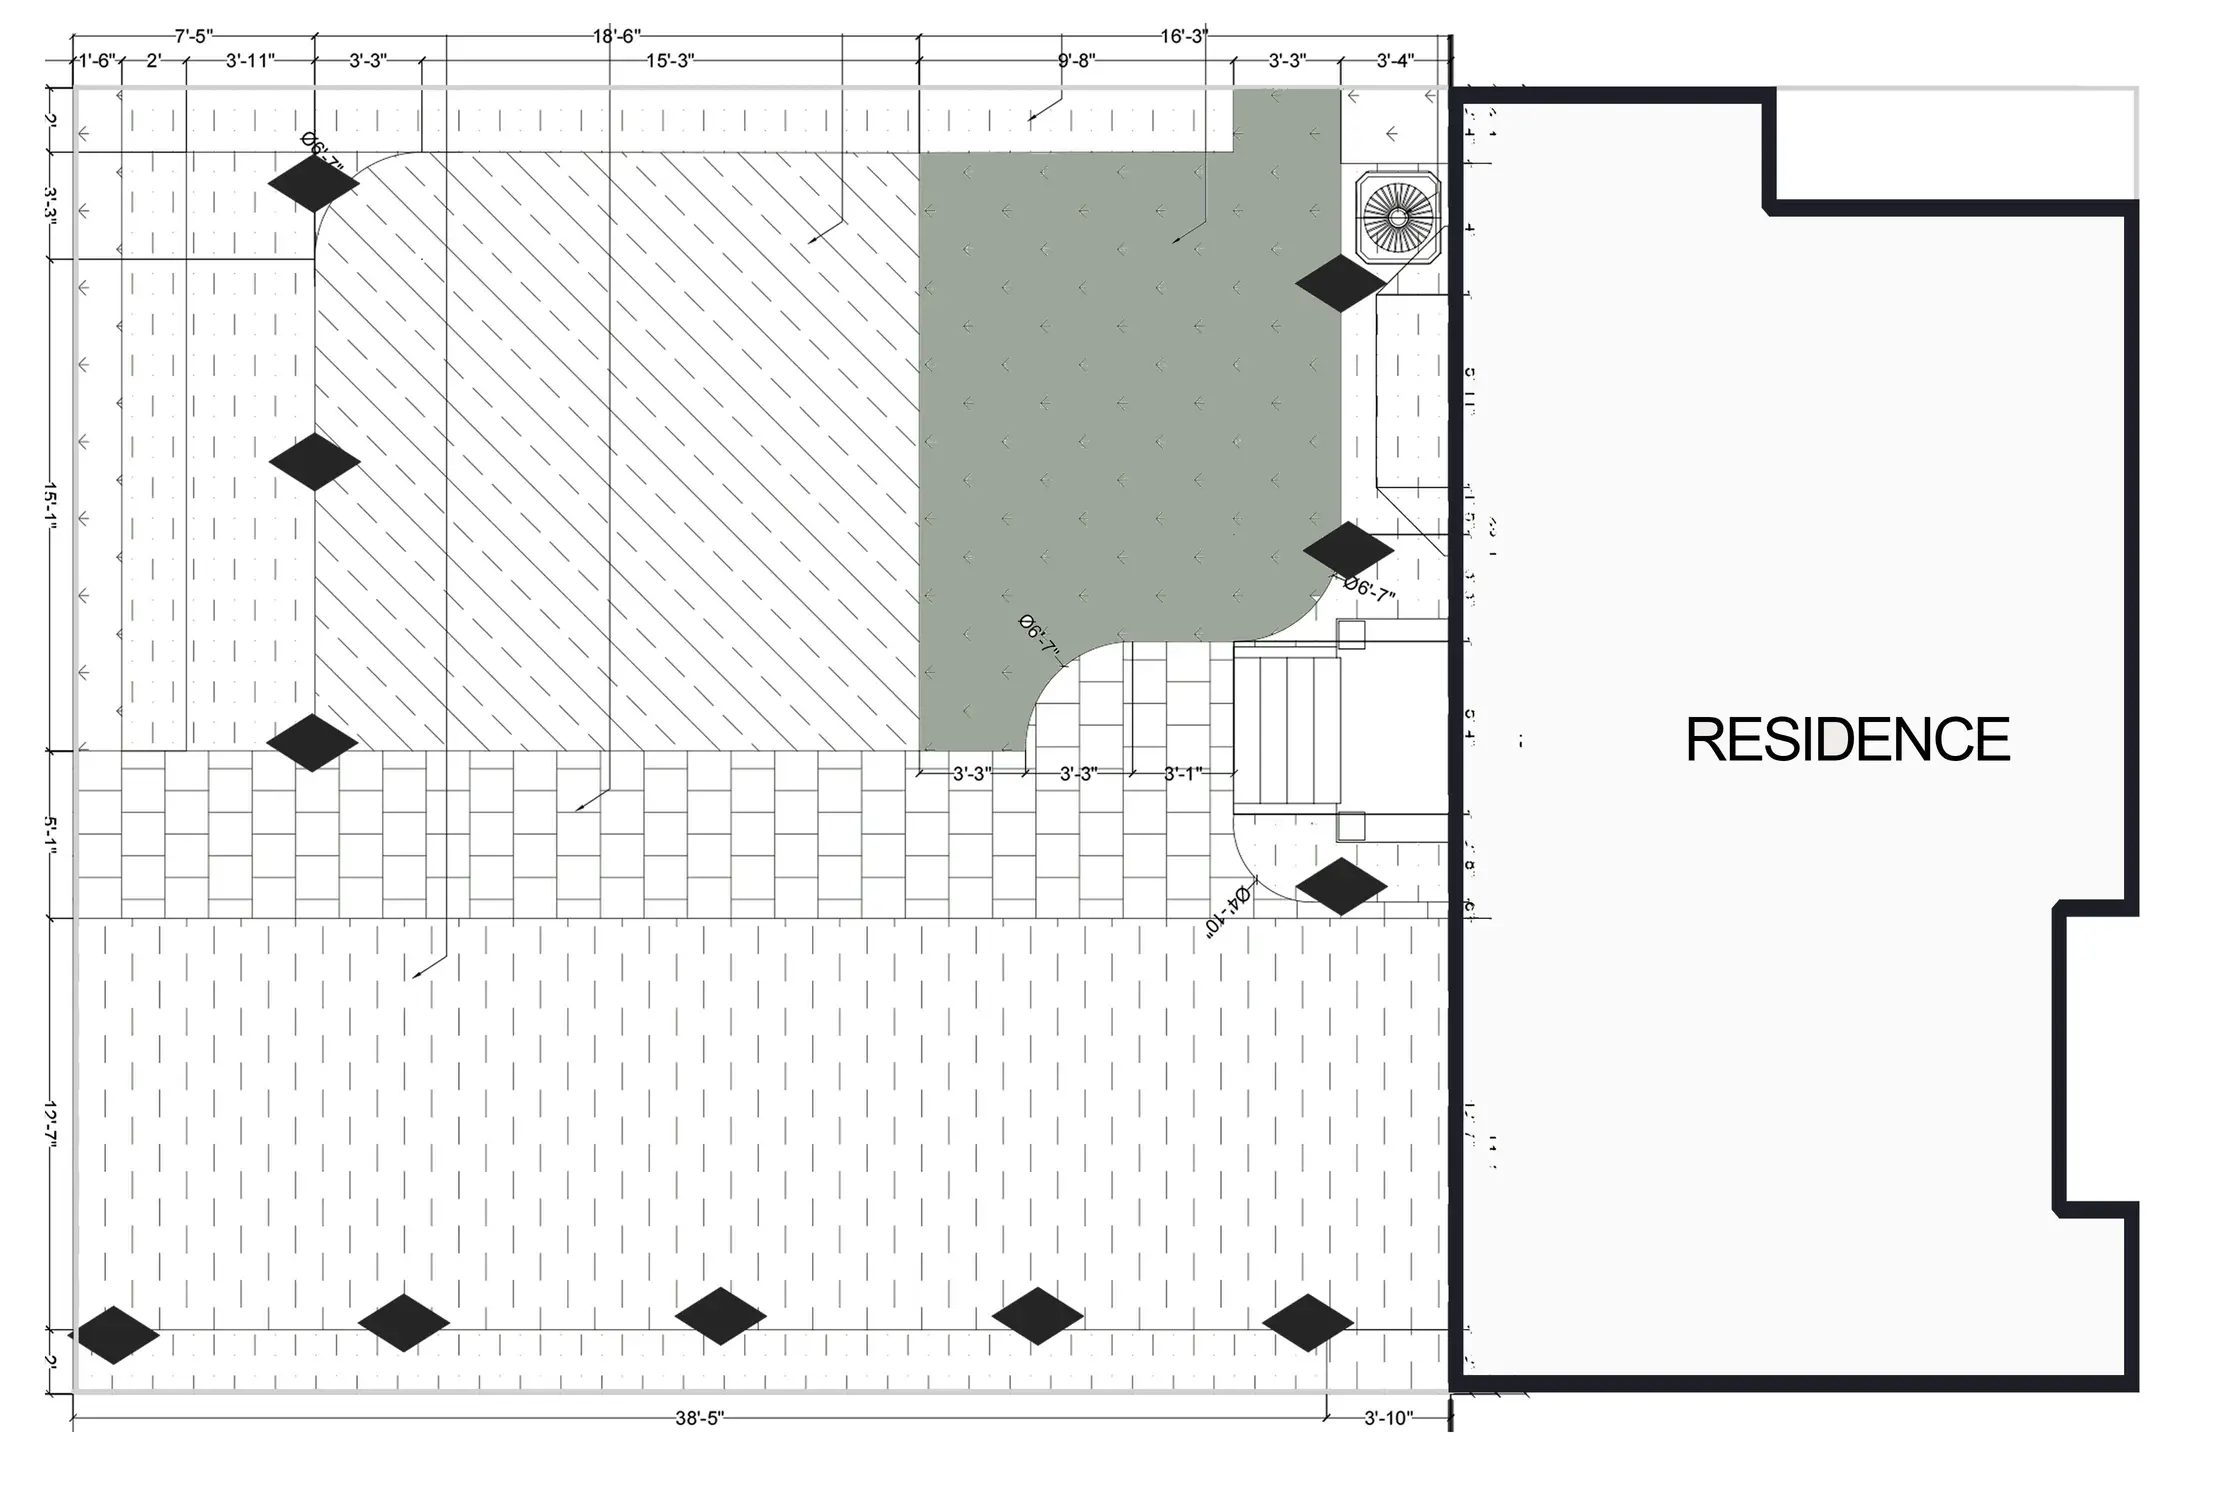 Architectural hardscape plan for residential outdoor space with measurements and design symbols.